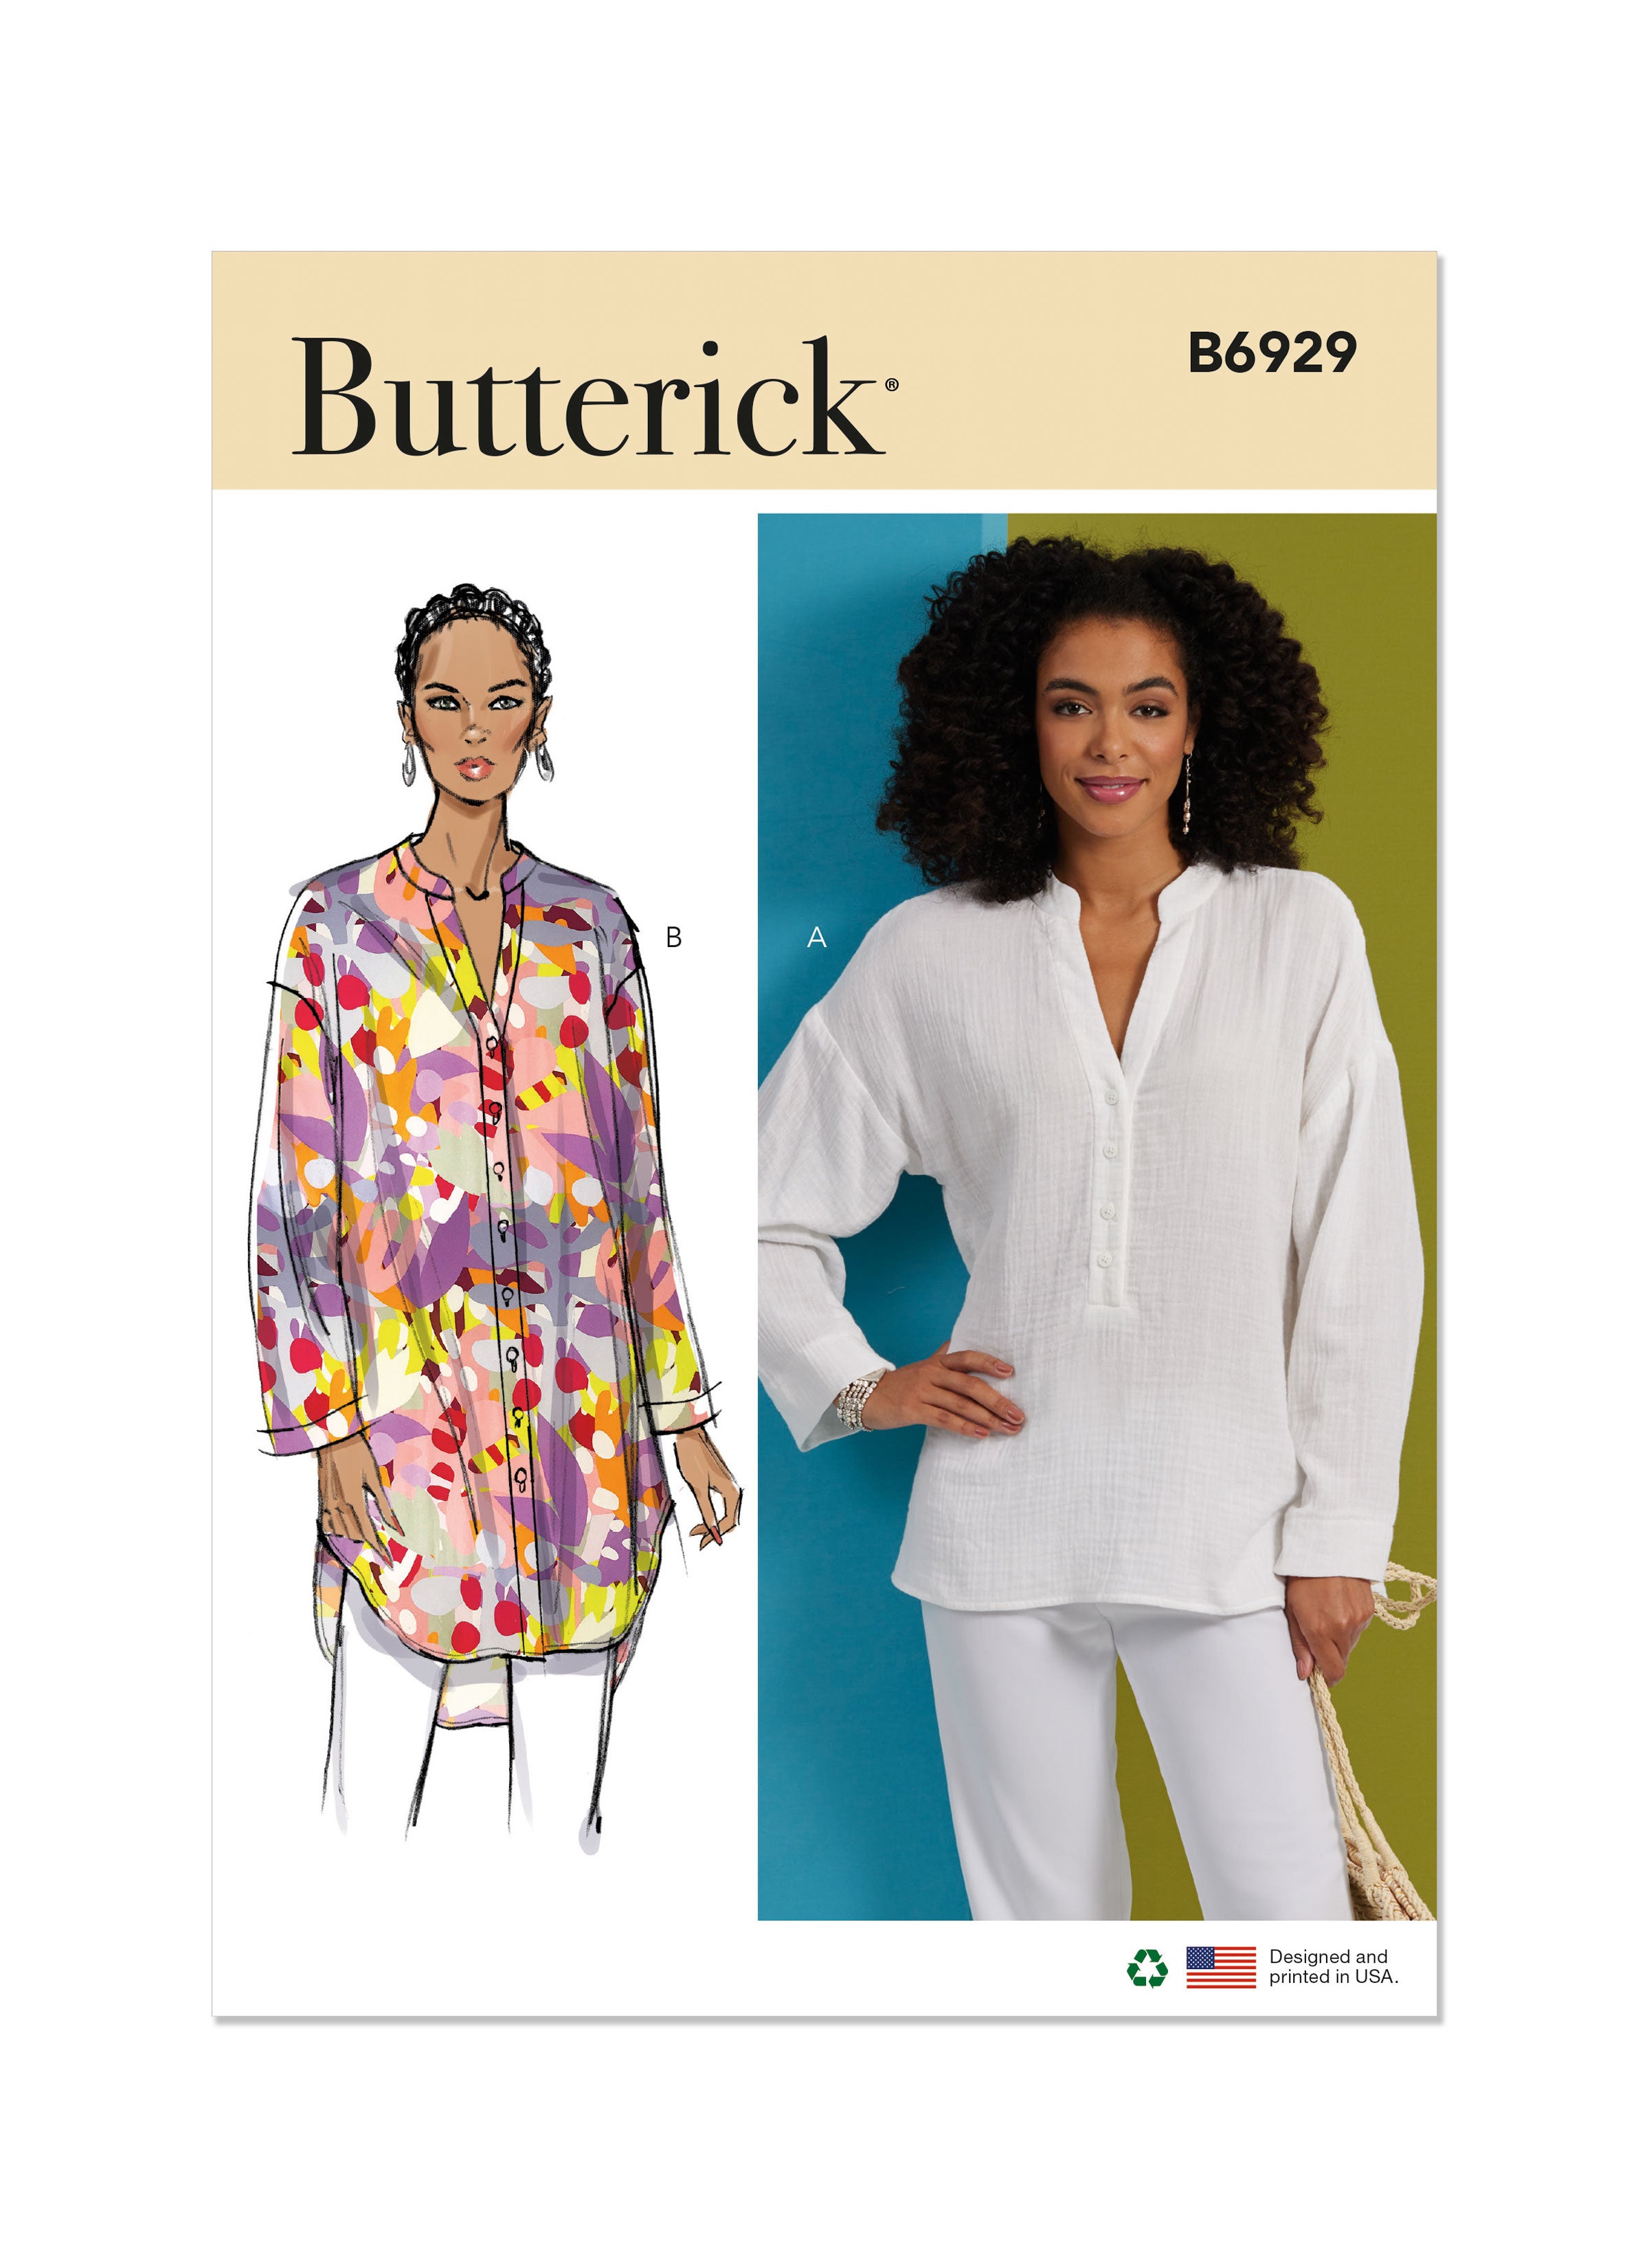 Butterick Sewing Pattern B6929 Misses’ Top and Tunic from Jaycotts Sewing Supplies